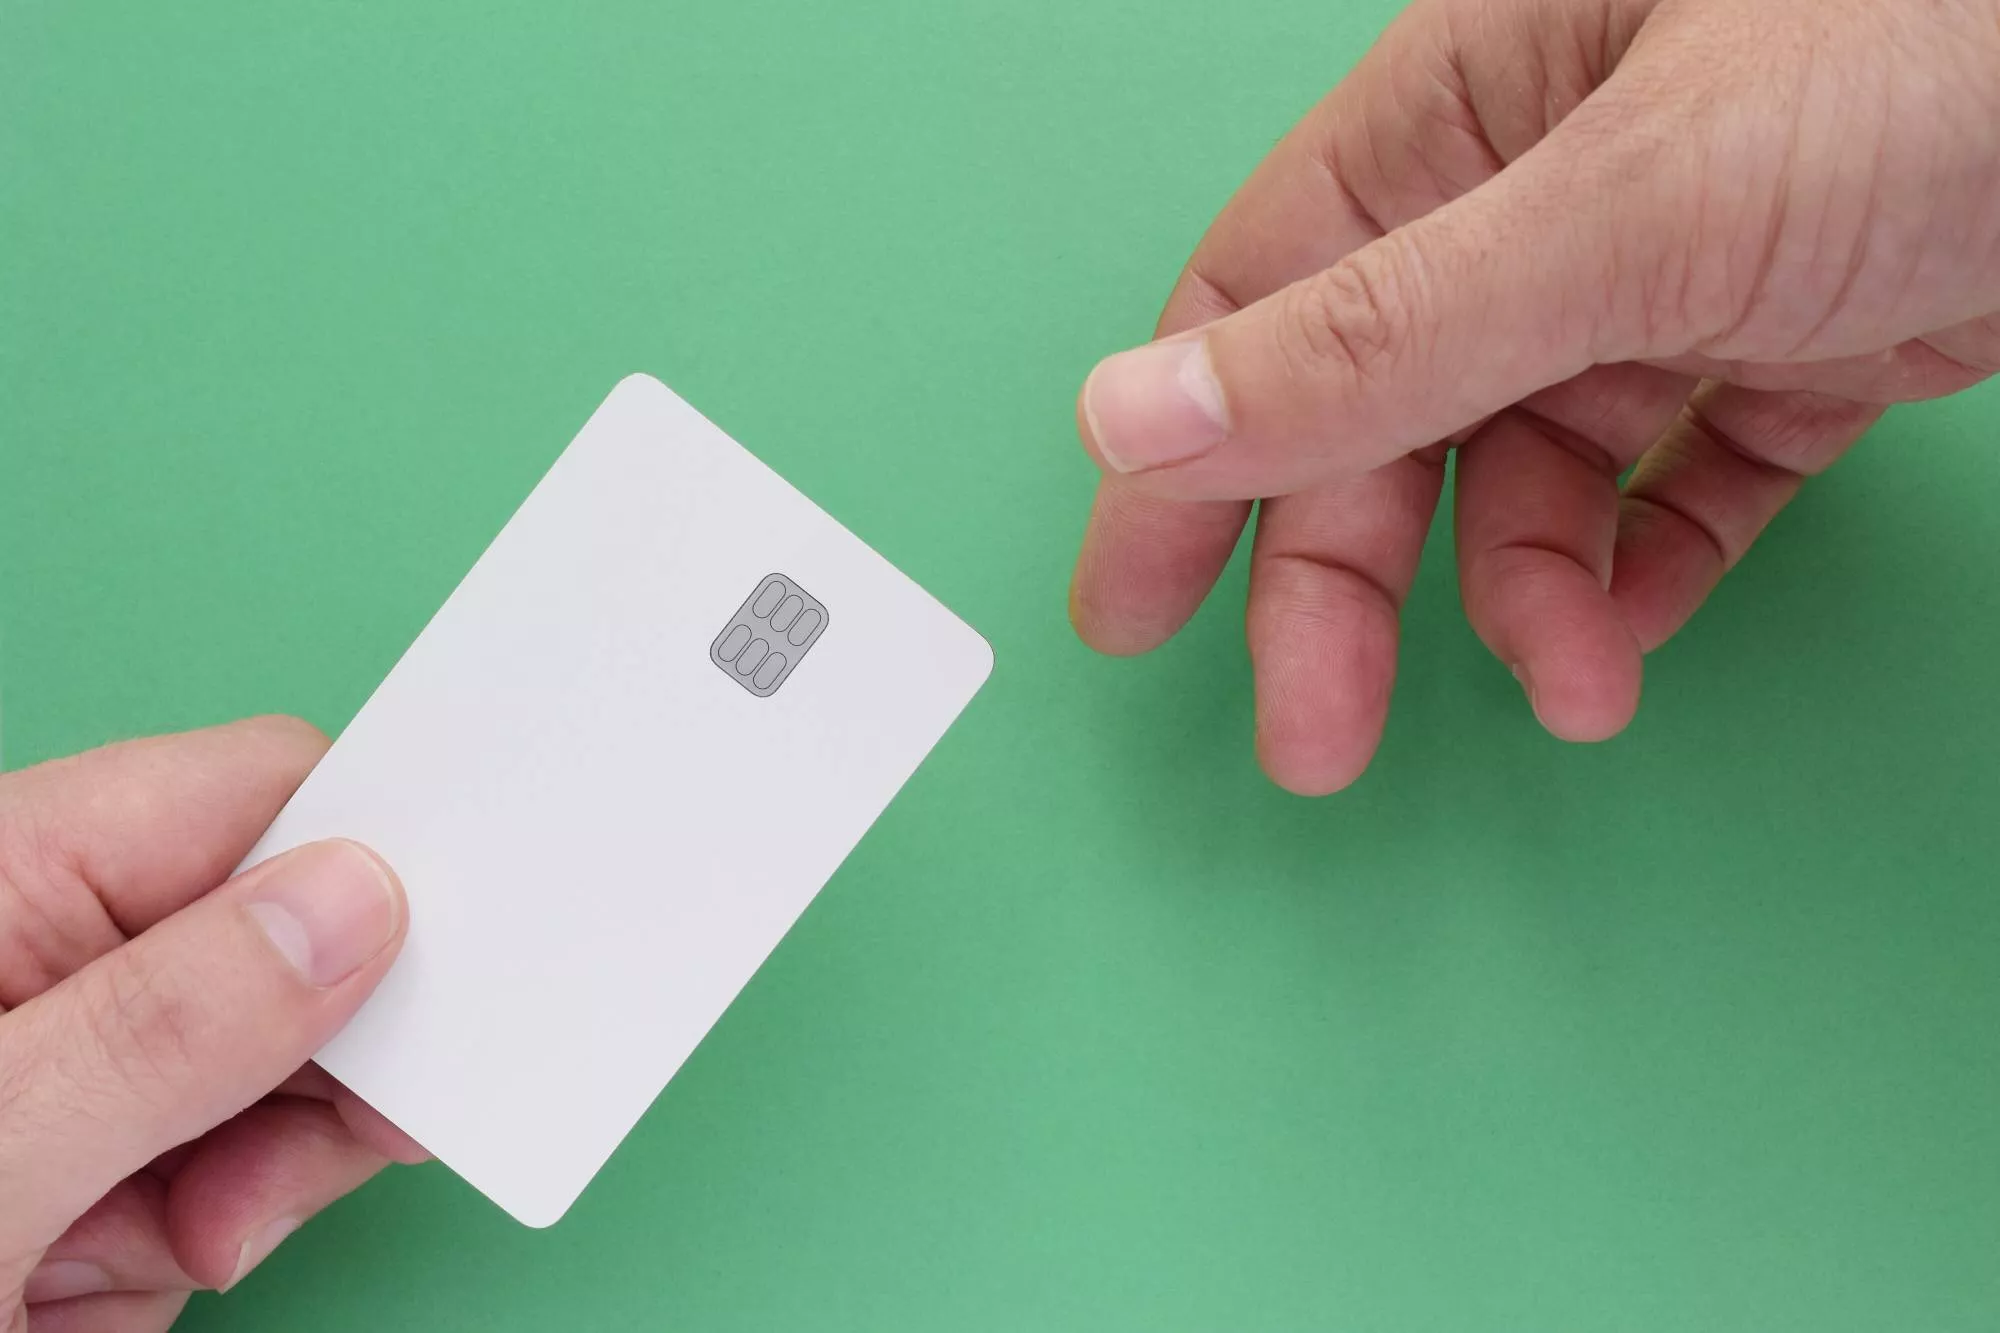 credit card that will be processed with a payment service provider being handed from one hand to another hand against a green background